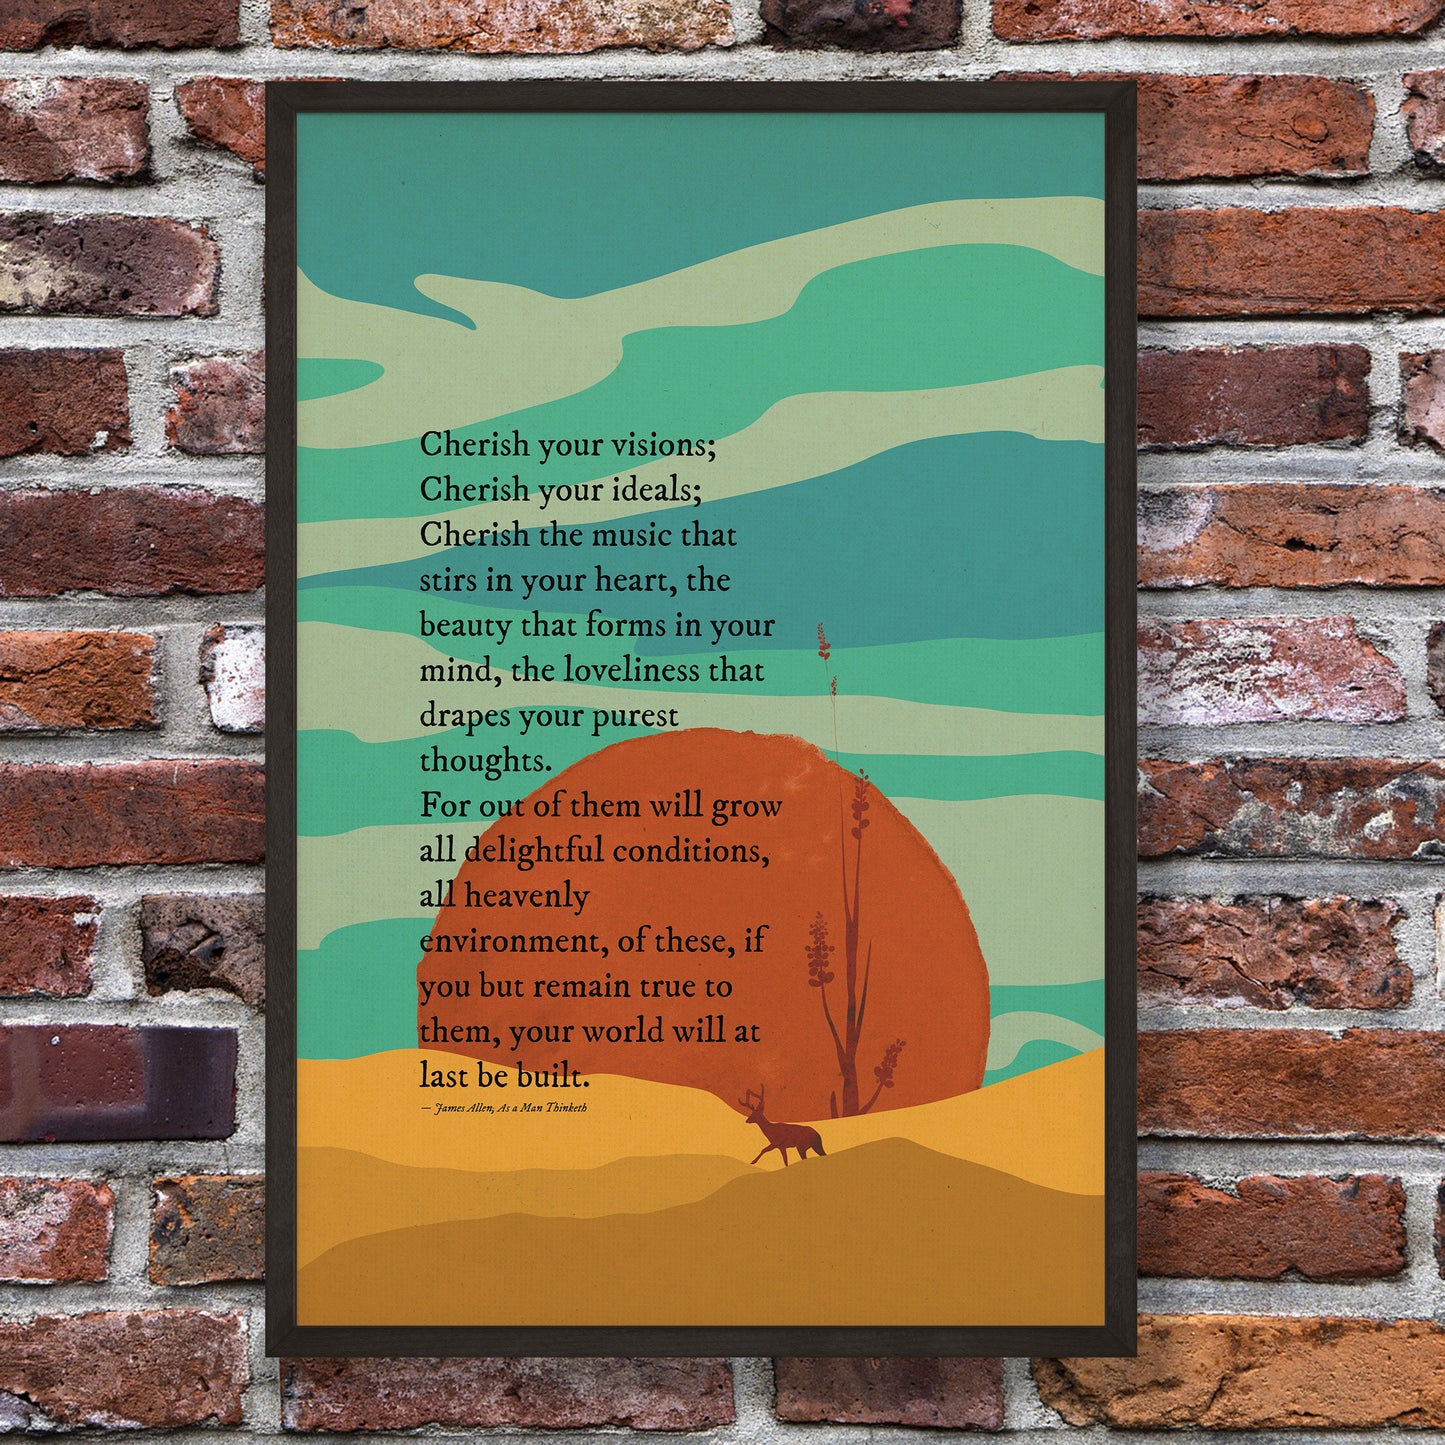 Cherish your vision by james allen from As a Man Thinketh with a colorful scenic illustration in orange, blue, yellow & black in black frame mockup